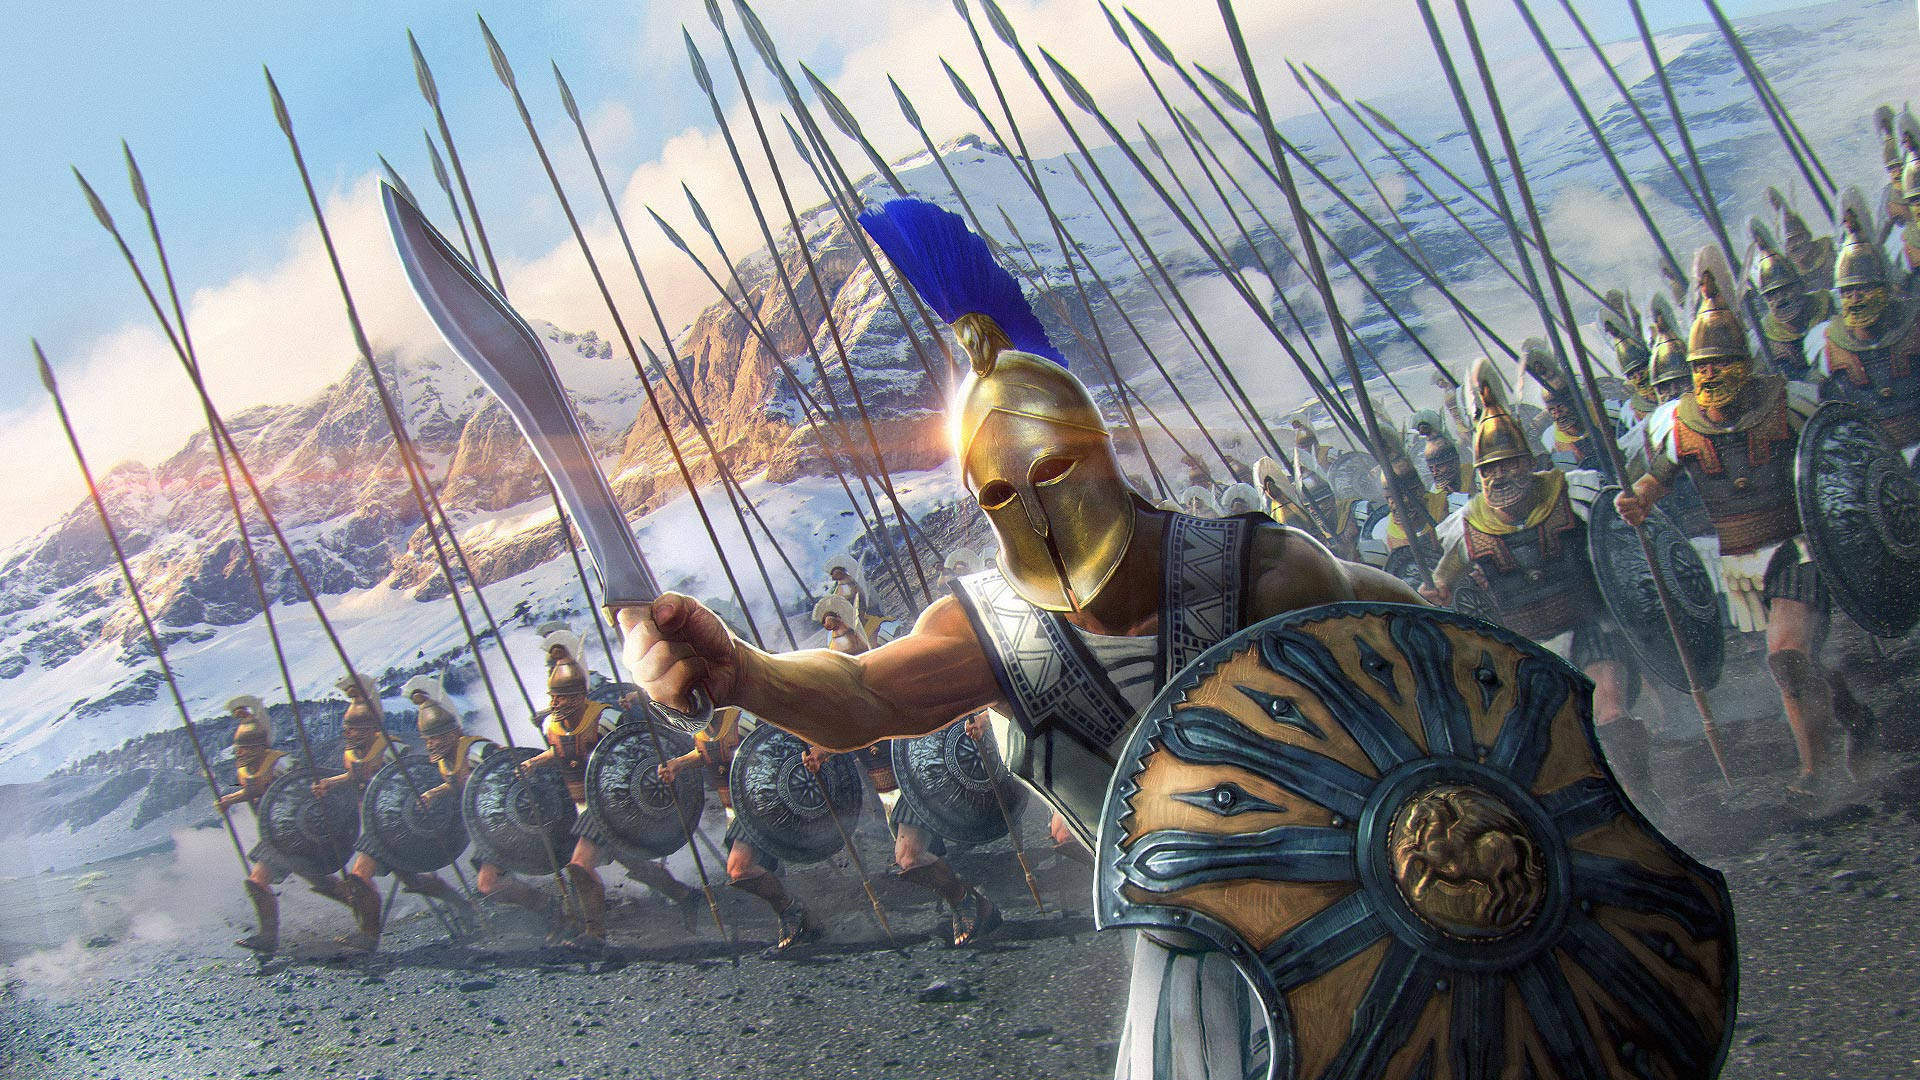 Fight your way to victory in Rome Total War Wallpaper